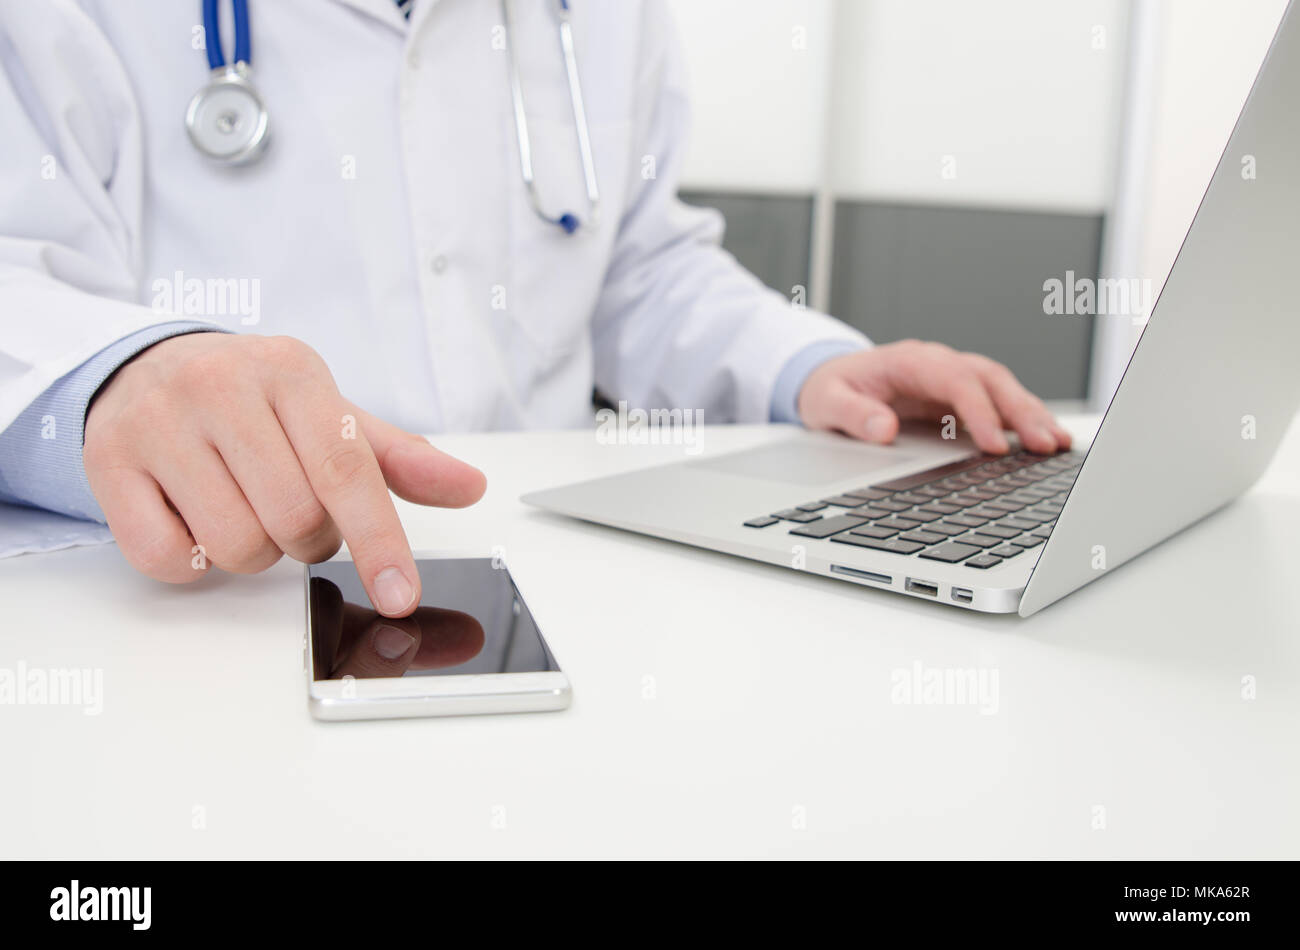 Doctor working with phone and laptop in hospital or clinic. Medical healthcare concept Stock Photo